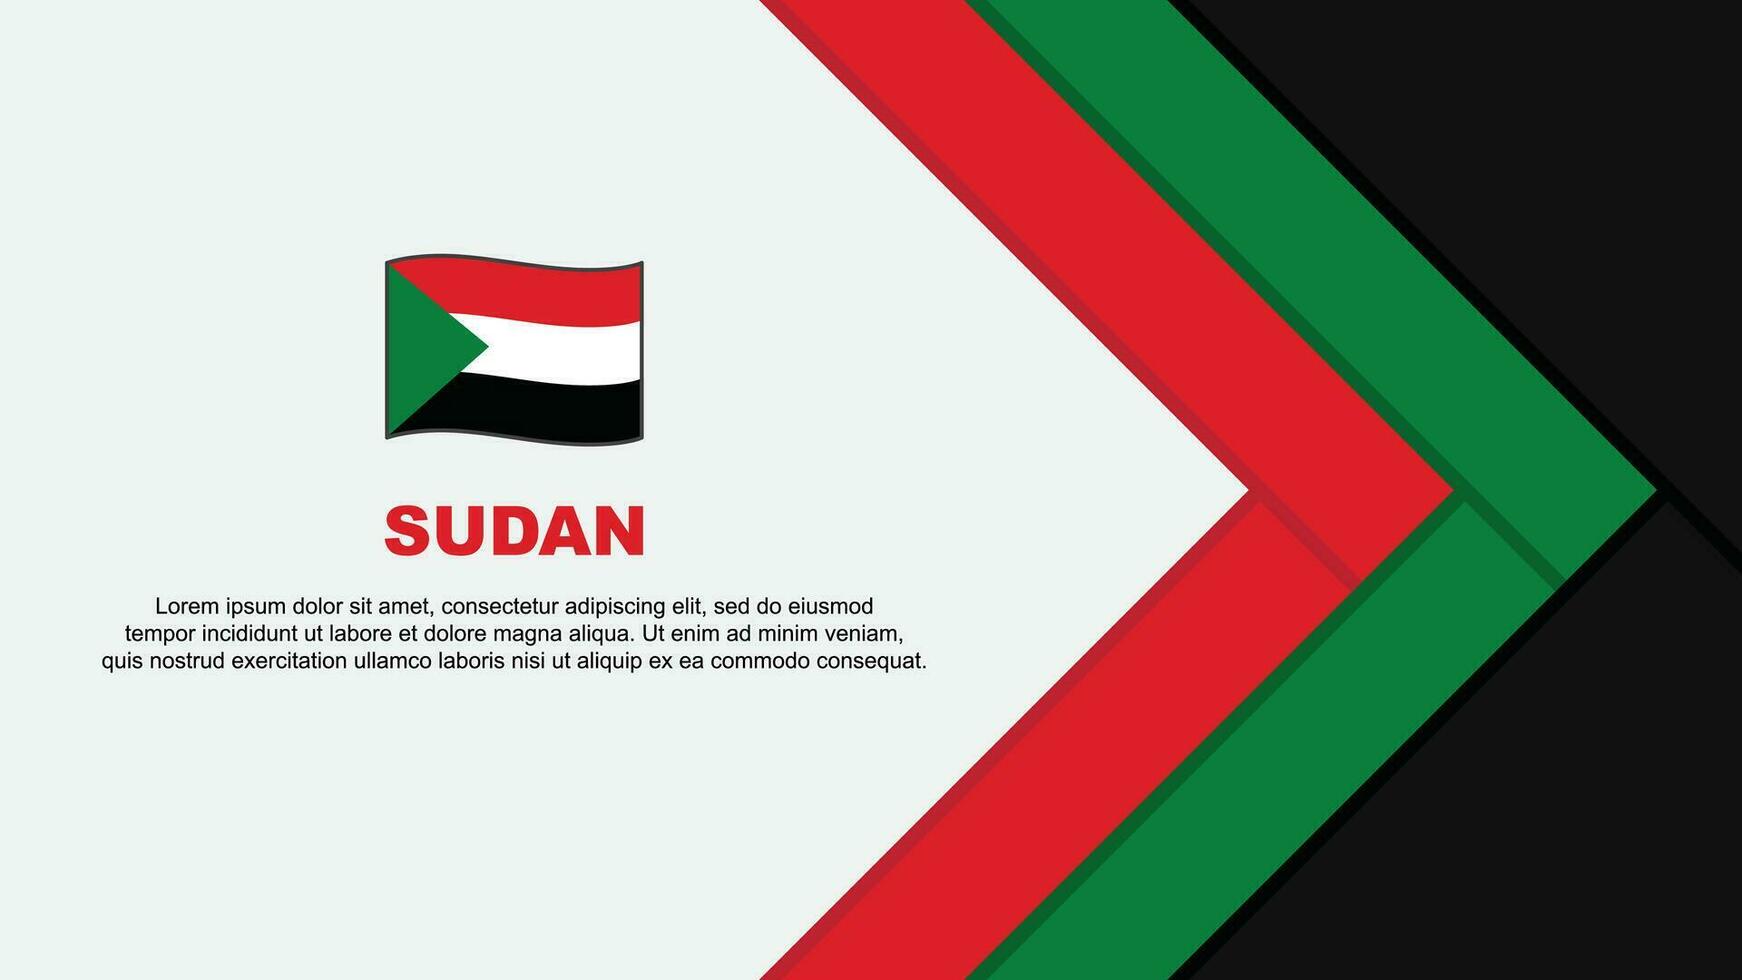 Sudan Flag Abstract Background Design Template. Sudan Independence Day Banner Cartoon Vector Illustration. Sudan Template